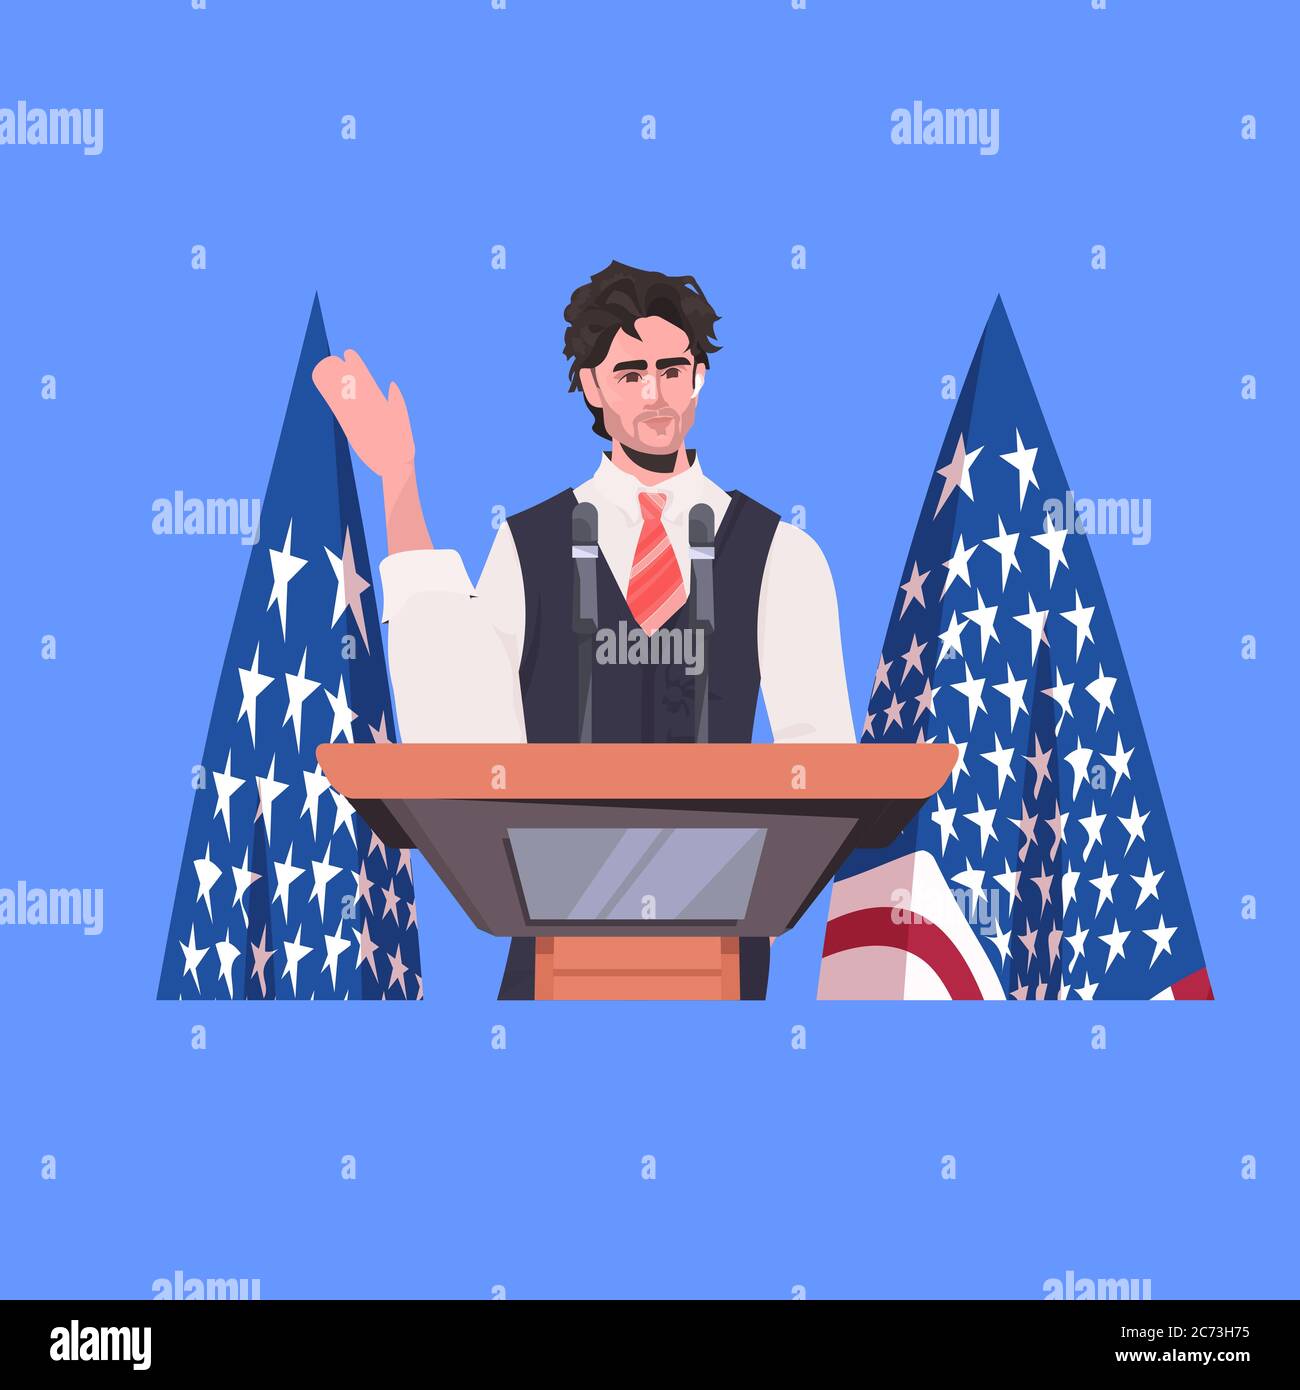 male politician making speech from tribune with usa flag 4th of july american independence day celebration concept portrait vector illustration Stock Vector